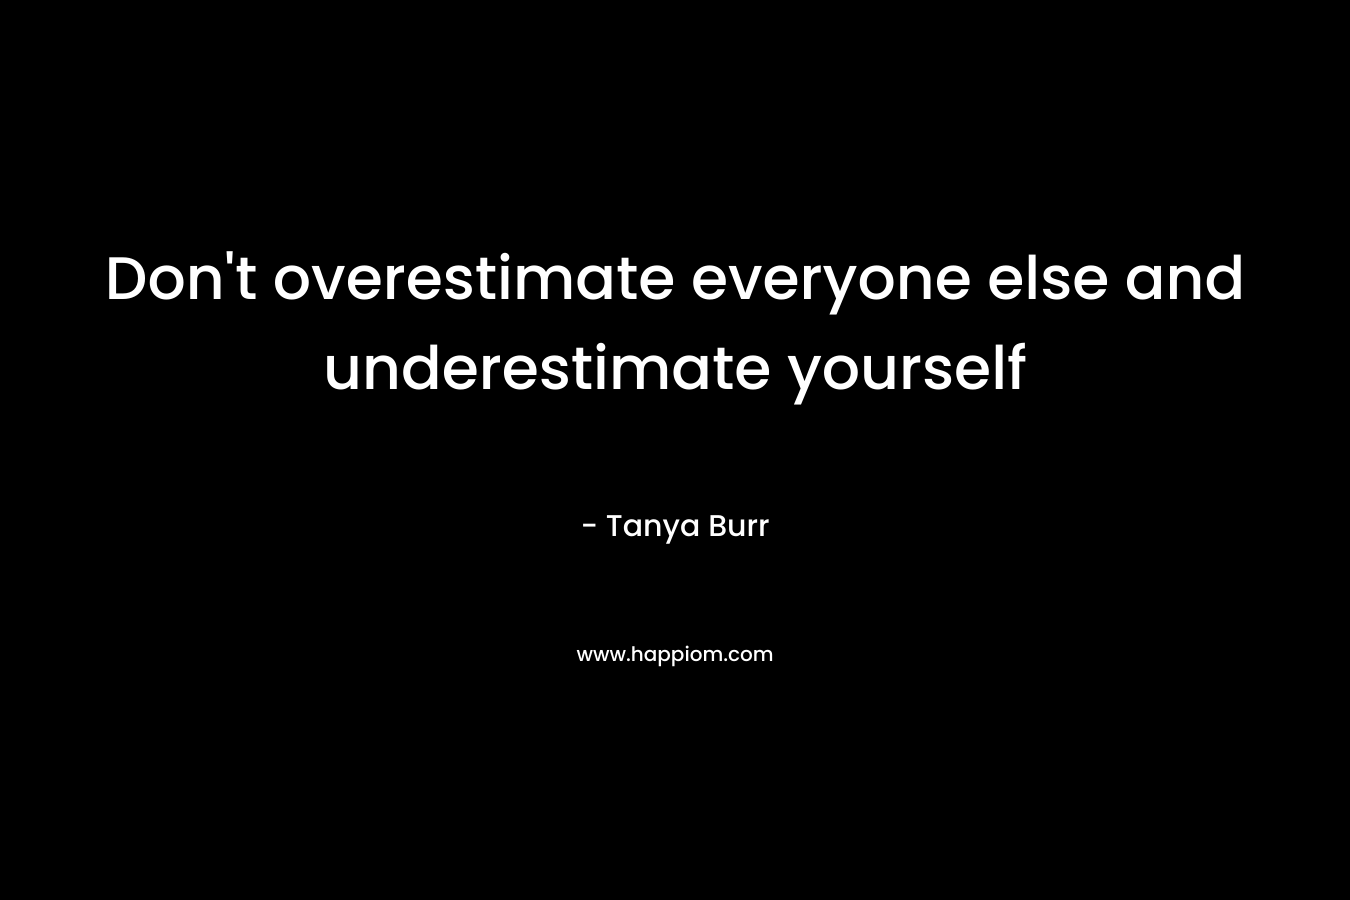 Don't overestimate everyone else and underestimate yourself